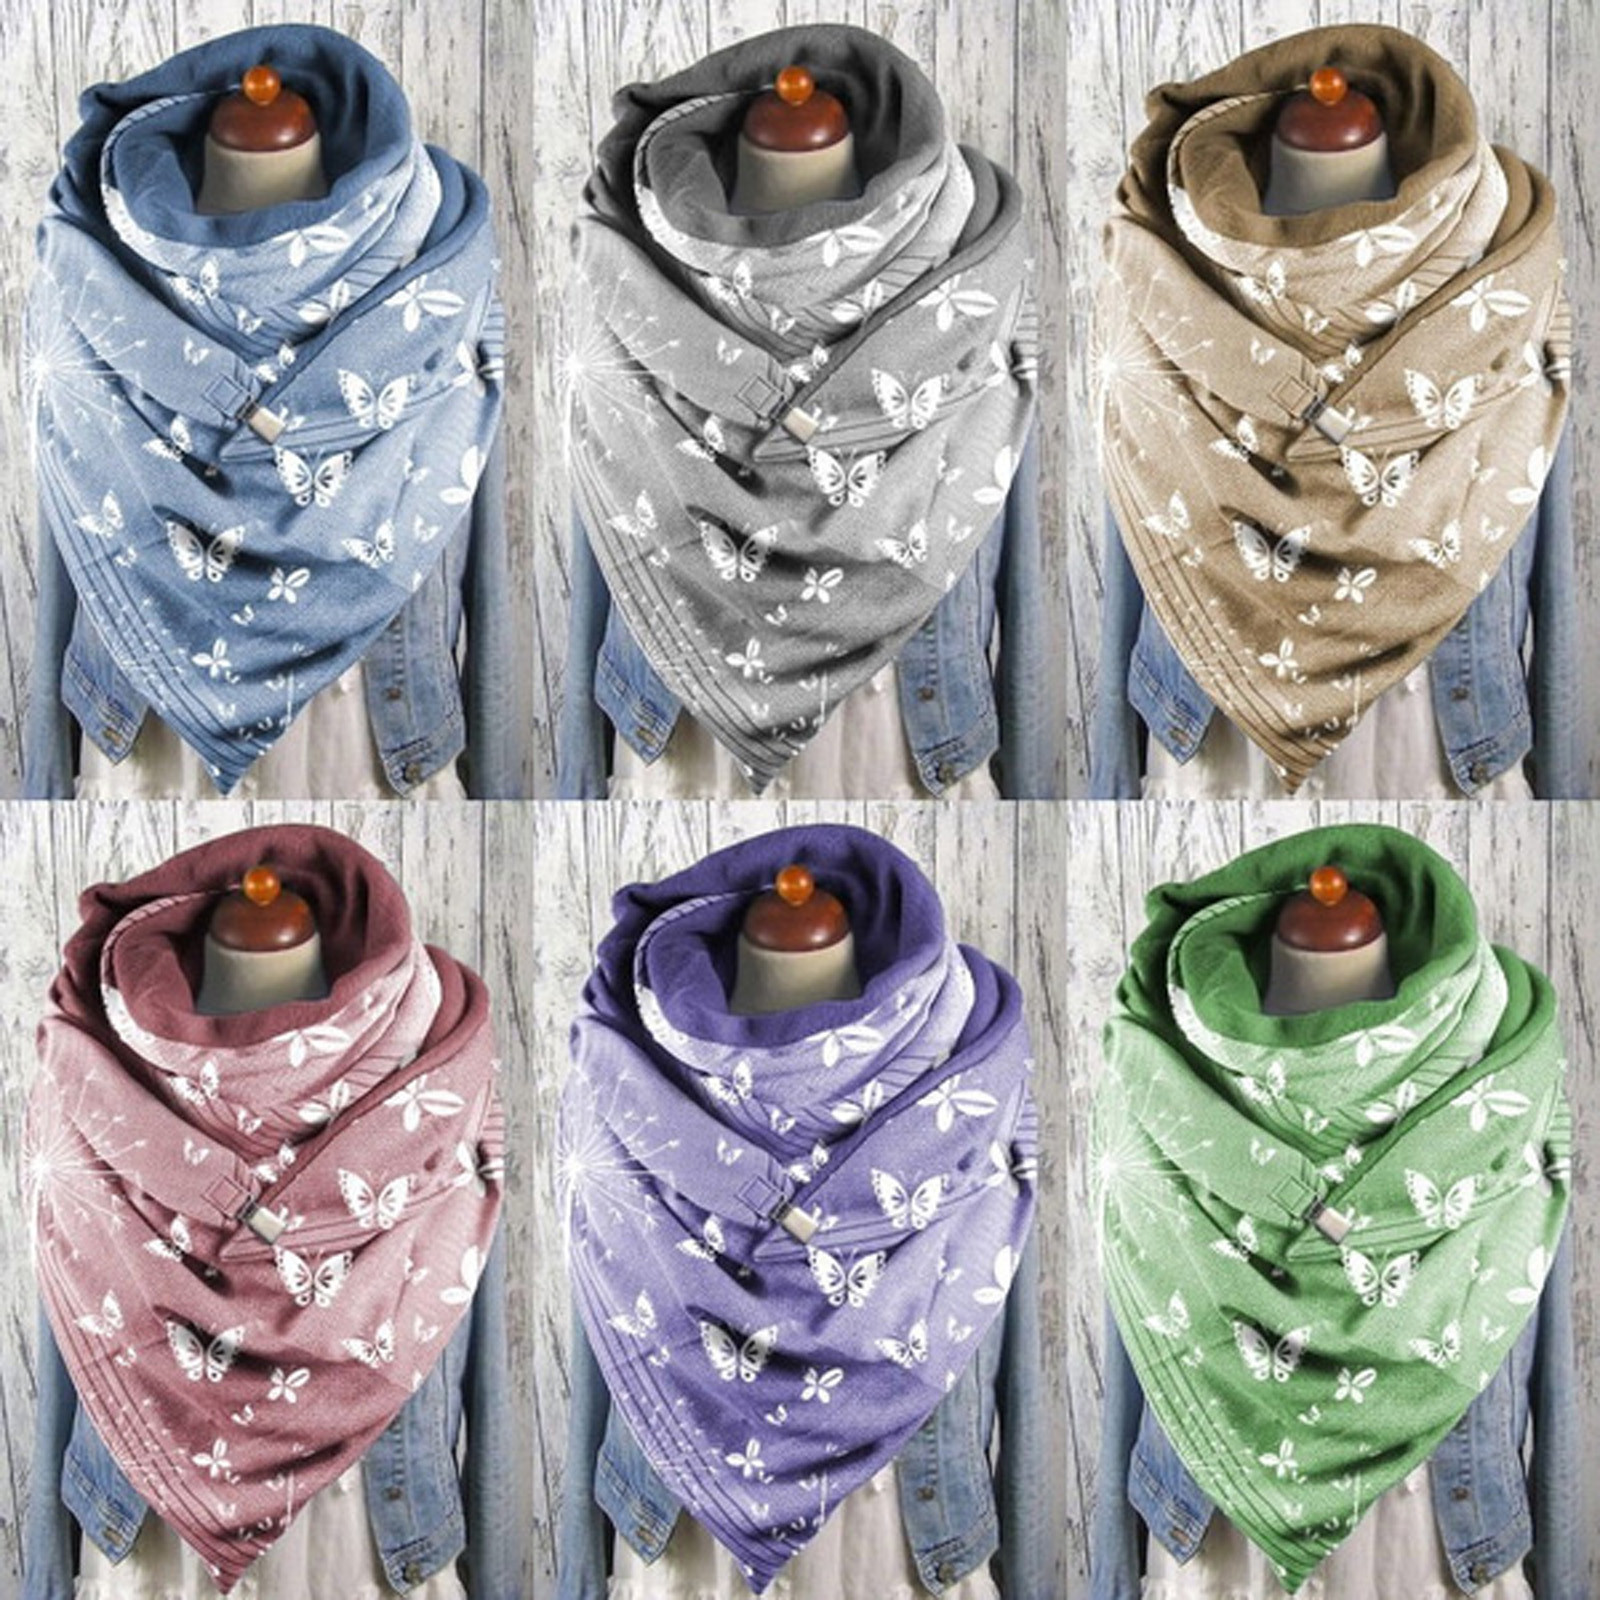 2020 Fashion Winter Women Butterfly Printed Button Scarves Soft Wrap Casual Warm Scarves Shawls Foulard Femme шарф бандана#35